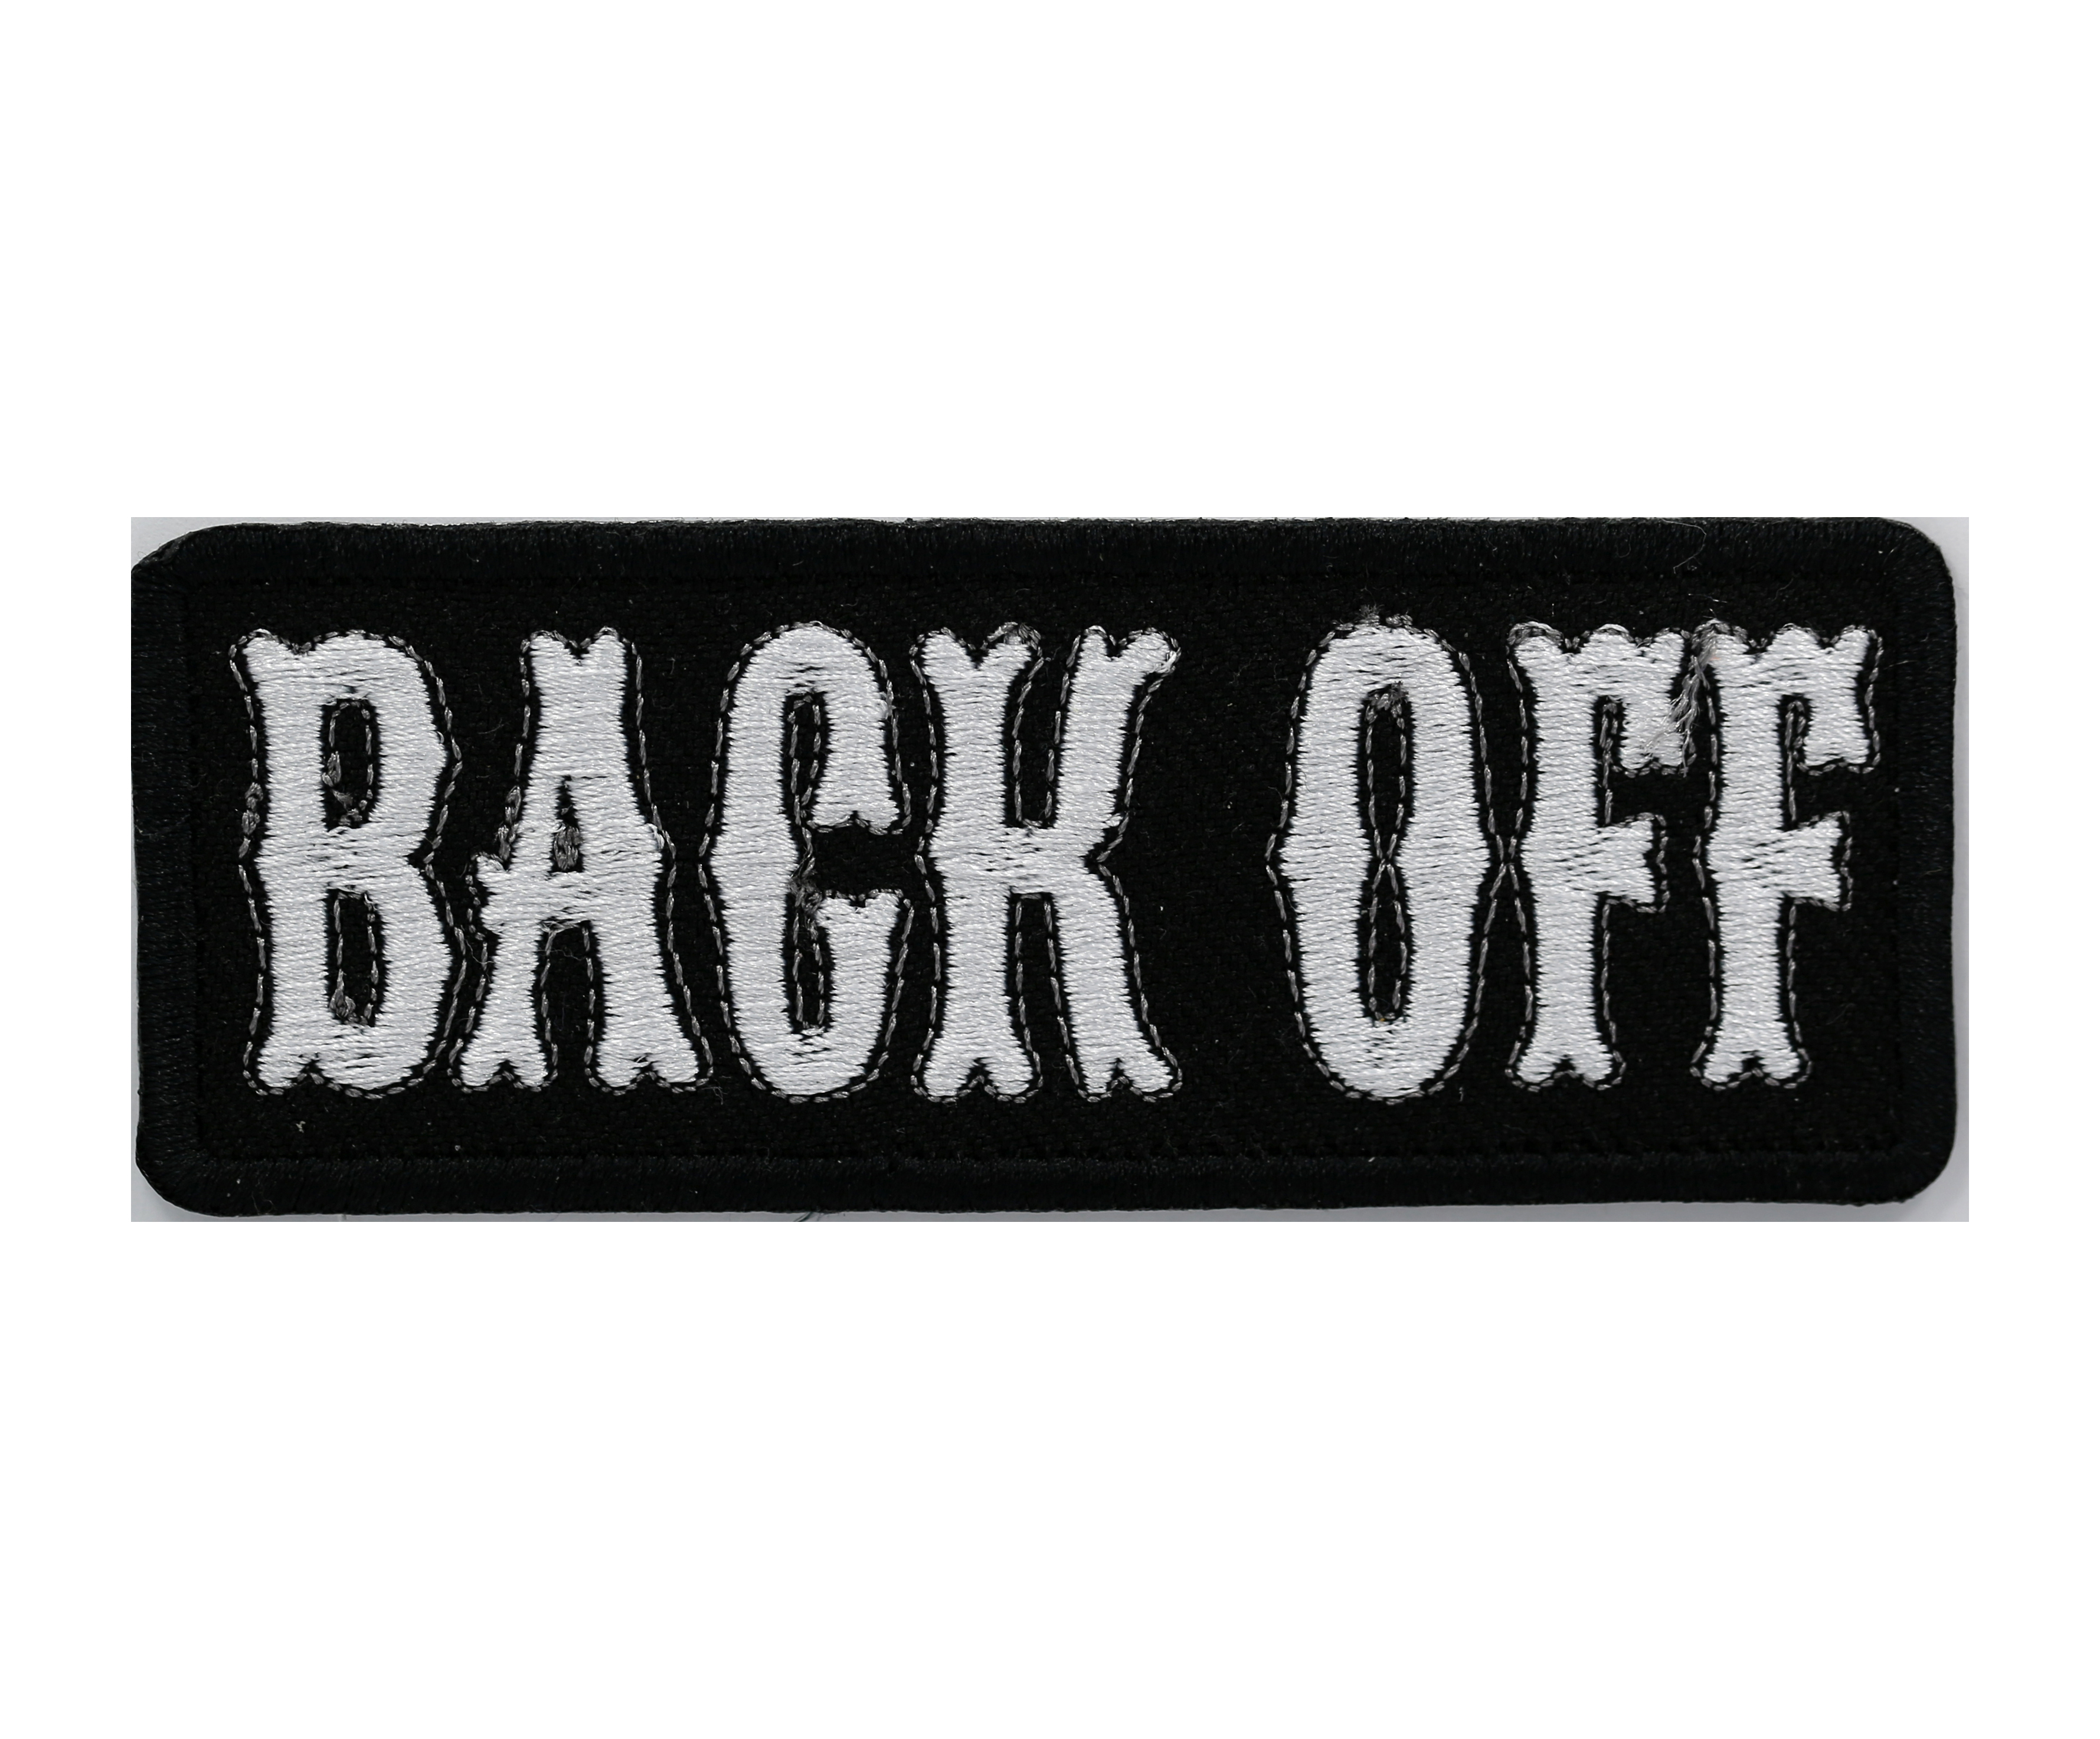 Back Off Biker Skull & Bandanna Iron On Sew On Embroidered Patch 4 1/2" x 2 1/2"